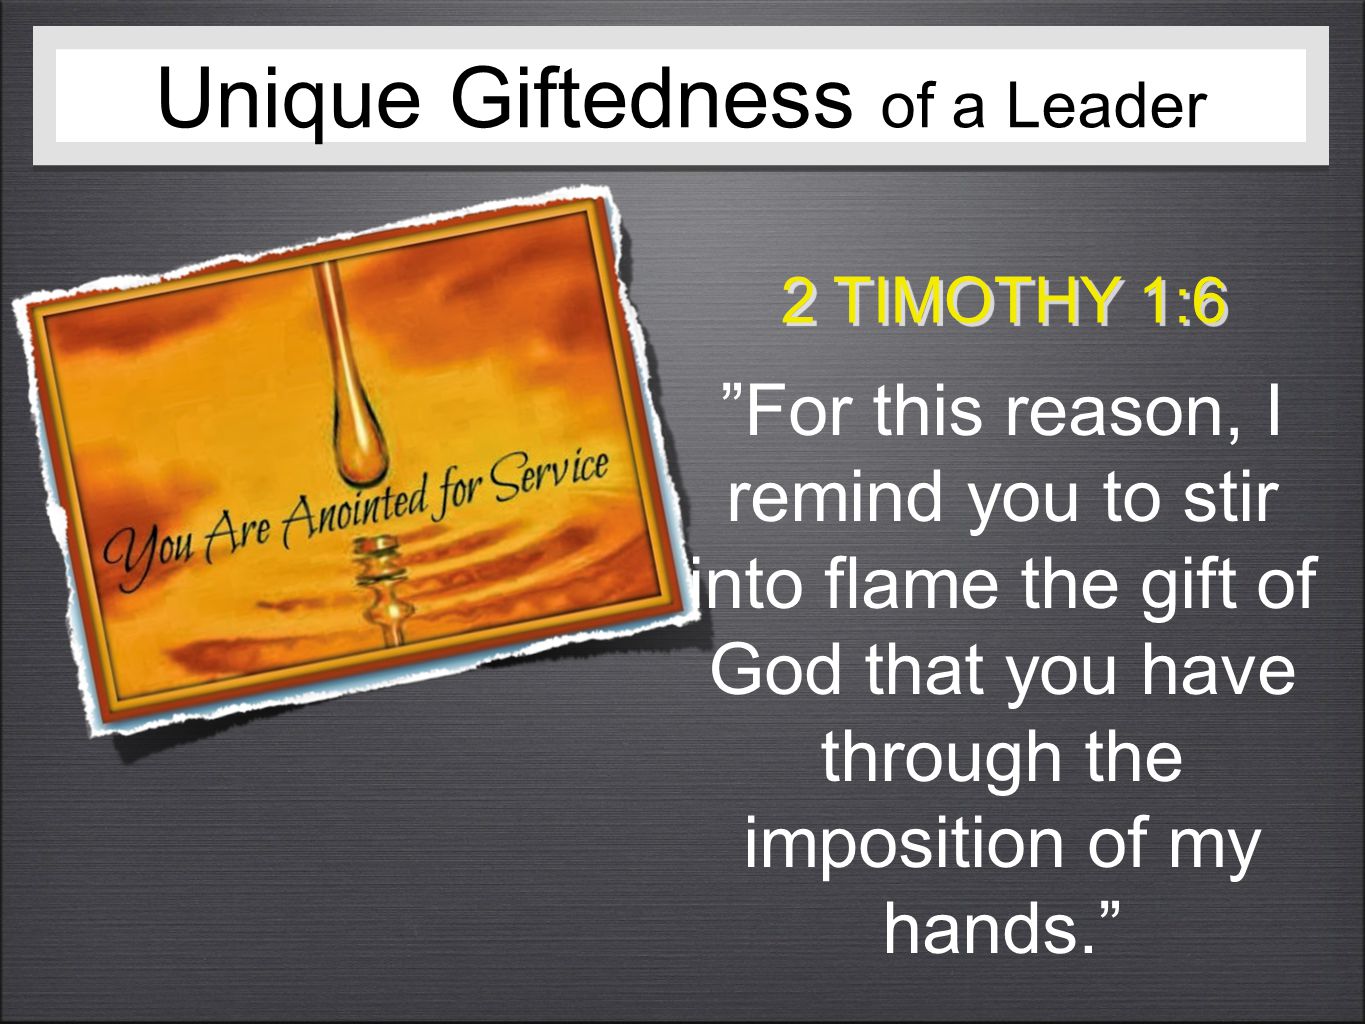 Unique Giftedness of a Leader 2 TIMOTHY 1:6 For this reason, I remind you to stir into flame the gift of God that you have through the imposition of my hands.